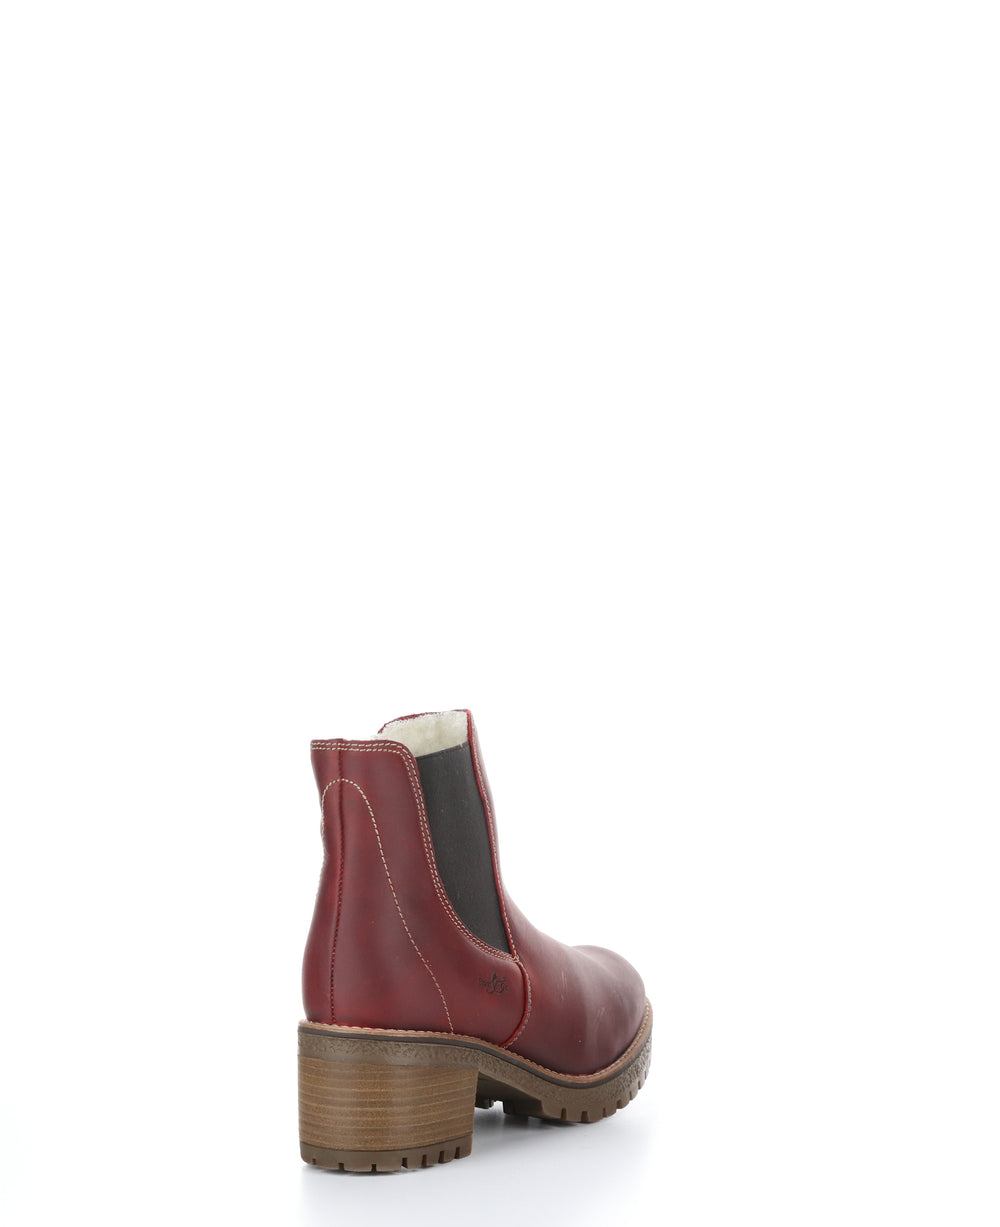 MASI Red/Dark Brown Zip Up Ankle Boots|MASI Bottines avec Fermeture Zippée in Rouge